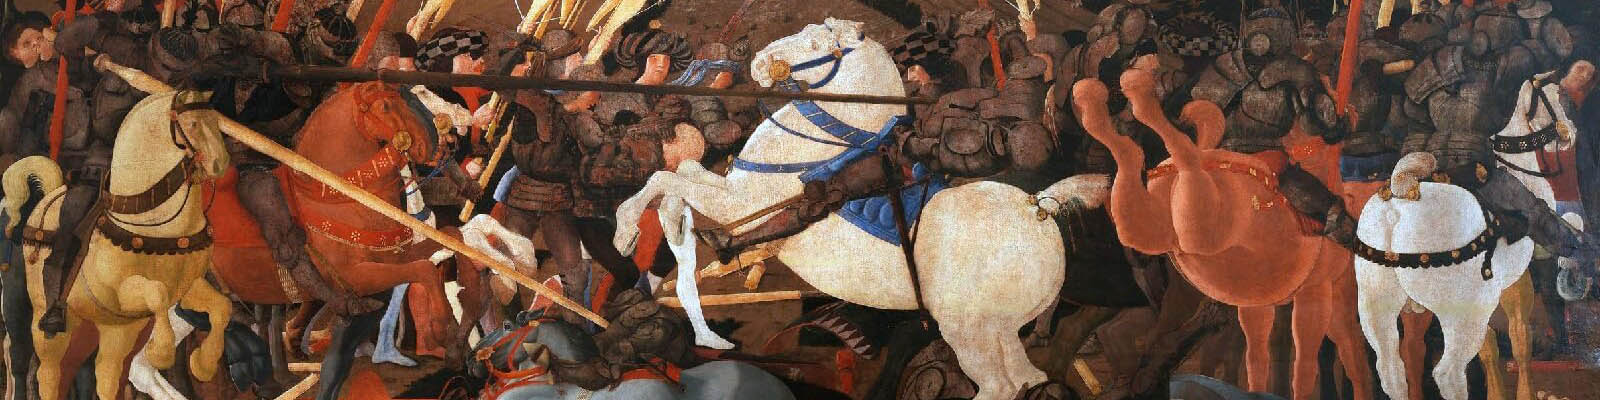 Historic painting of war with knights on horseback. 